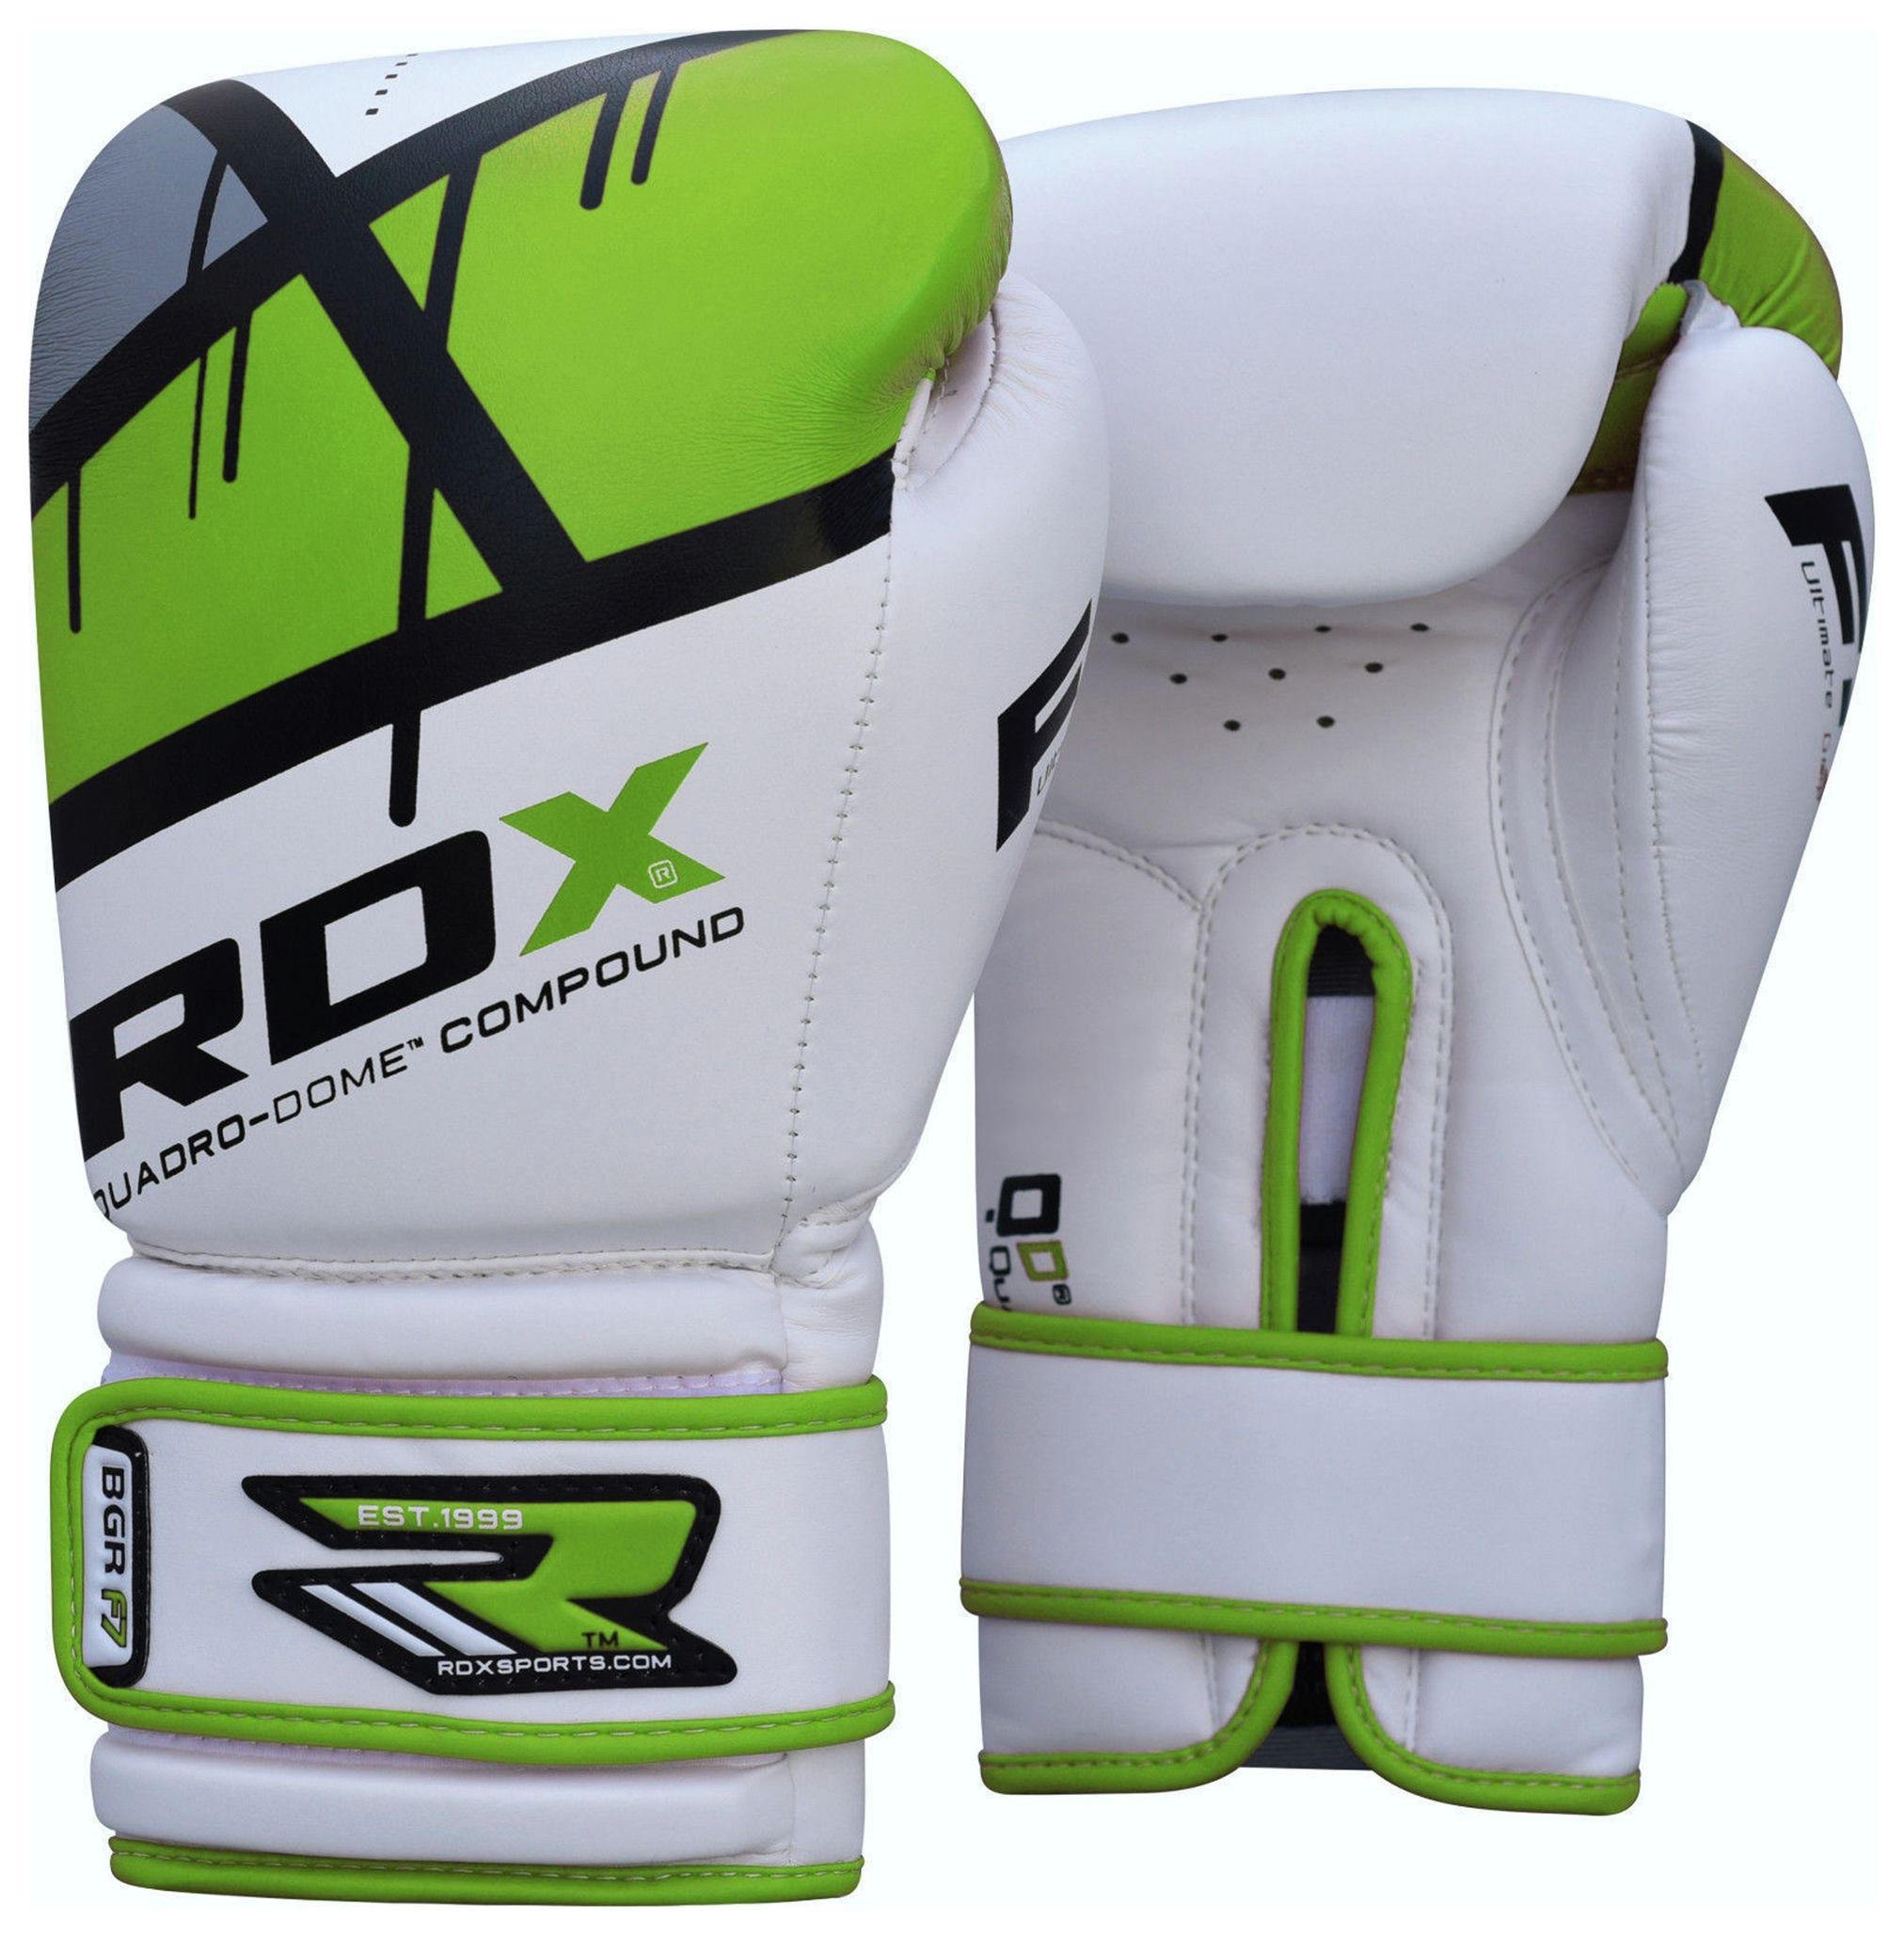 RDX Synthetic Leather 12oz Boxing Gloves - Green